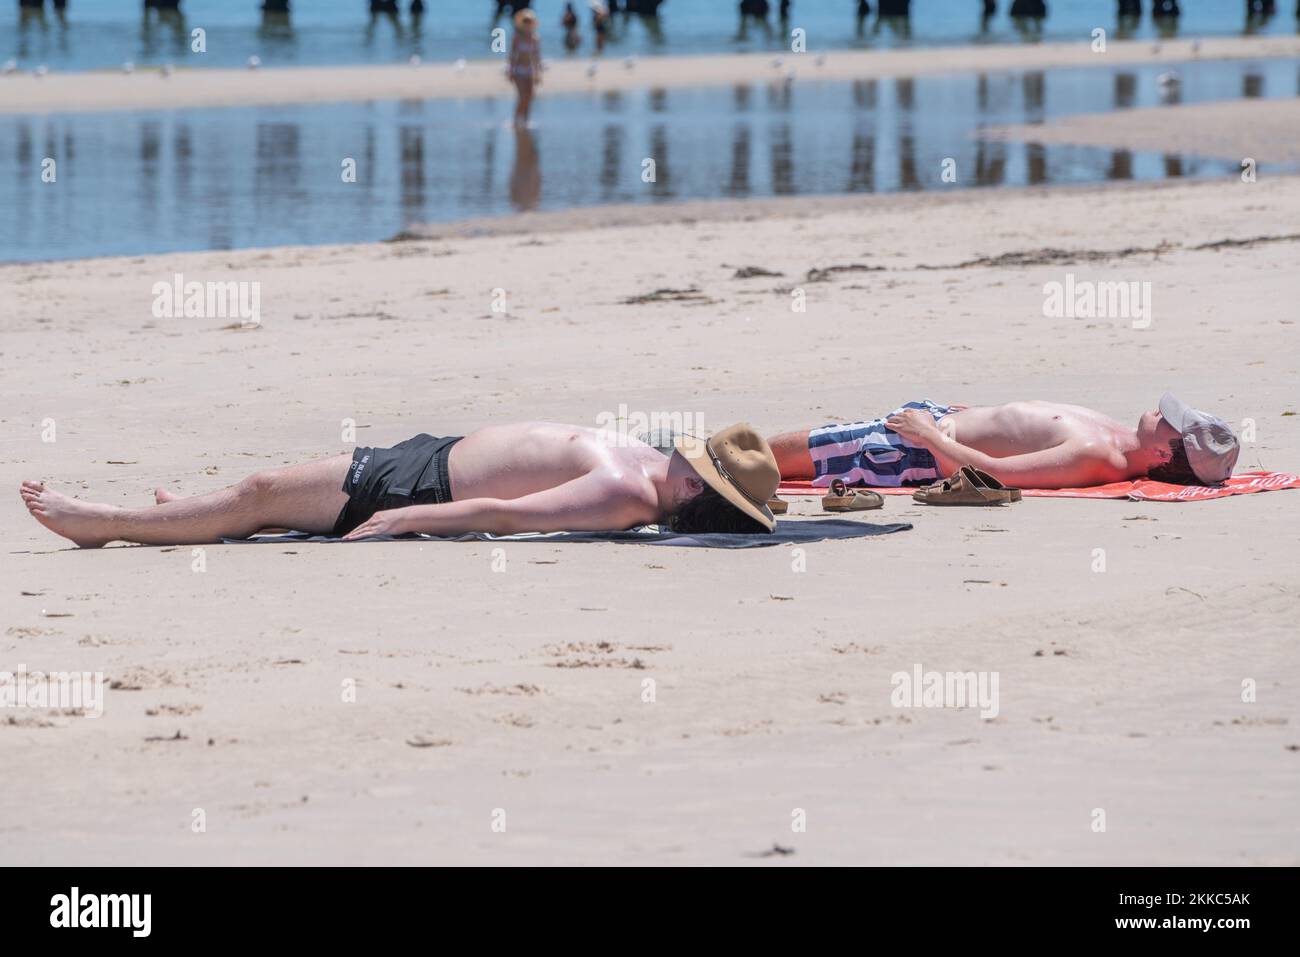 Adelaide, Australia. 25 November 2022.  Sunbathers enjoying the hot weather at the beach in Adelaide Australia as temperatures are forecast to reach above 30celsius. Credit: amer ghazzal/Alamy Live News Stock Photo